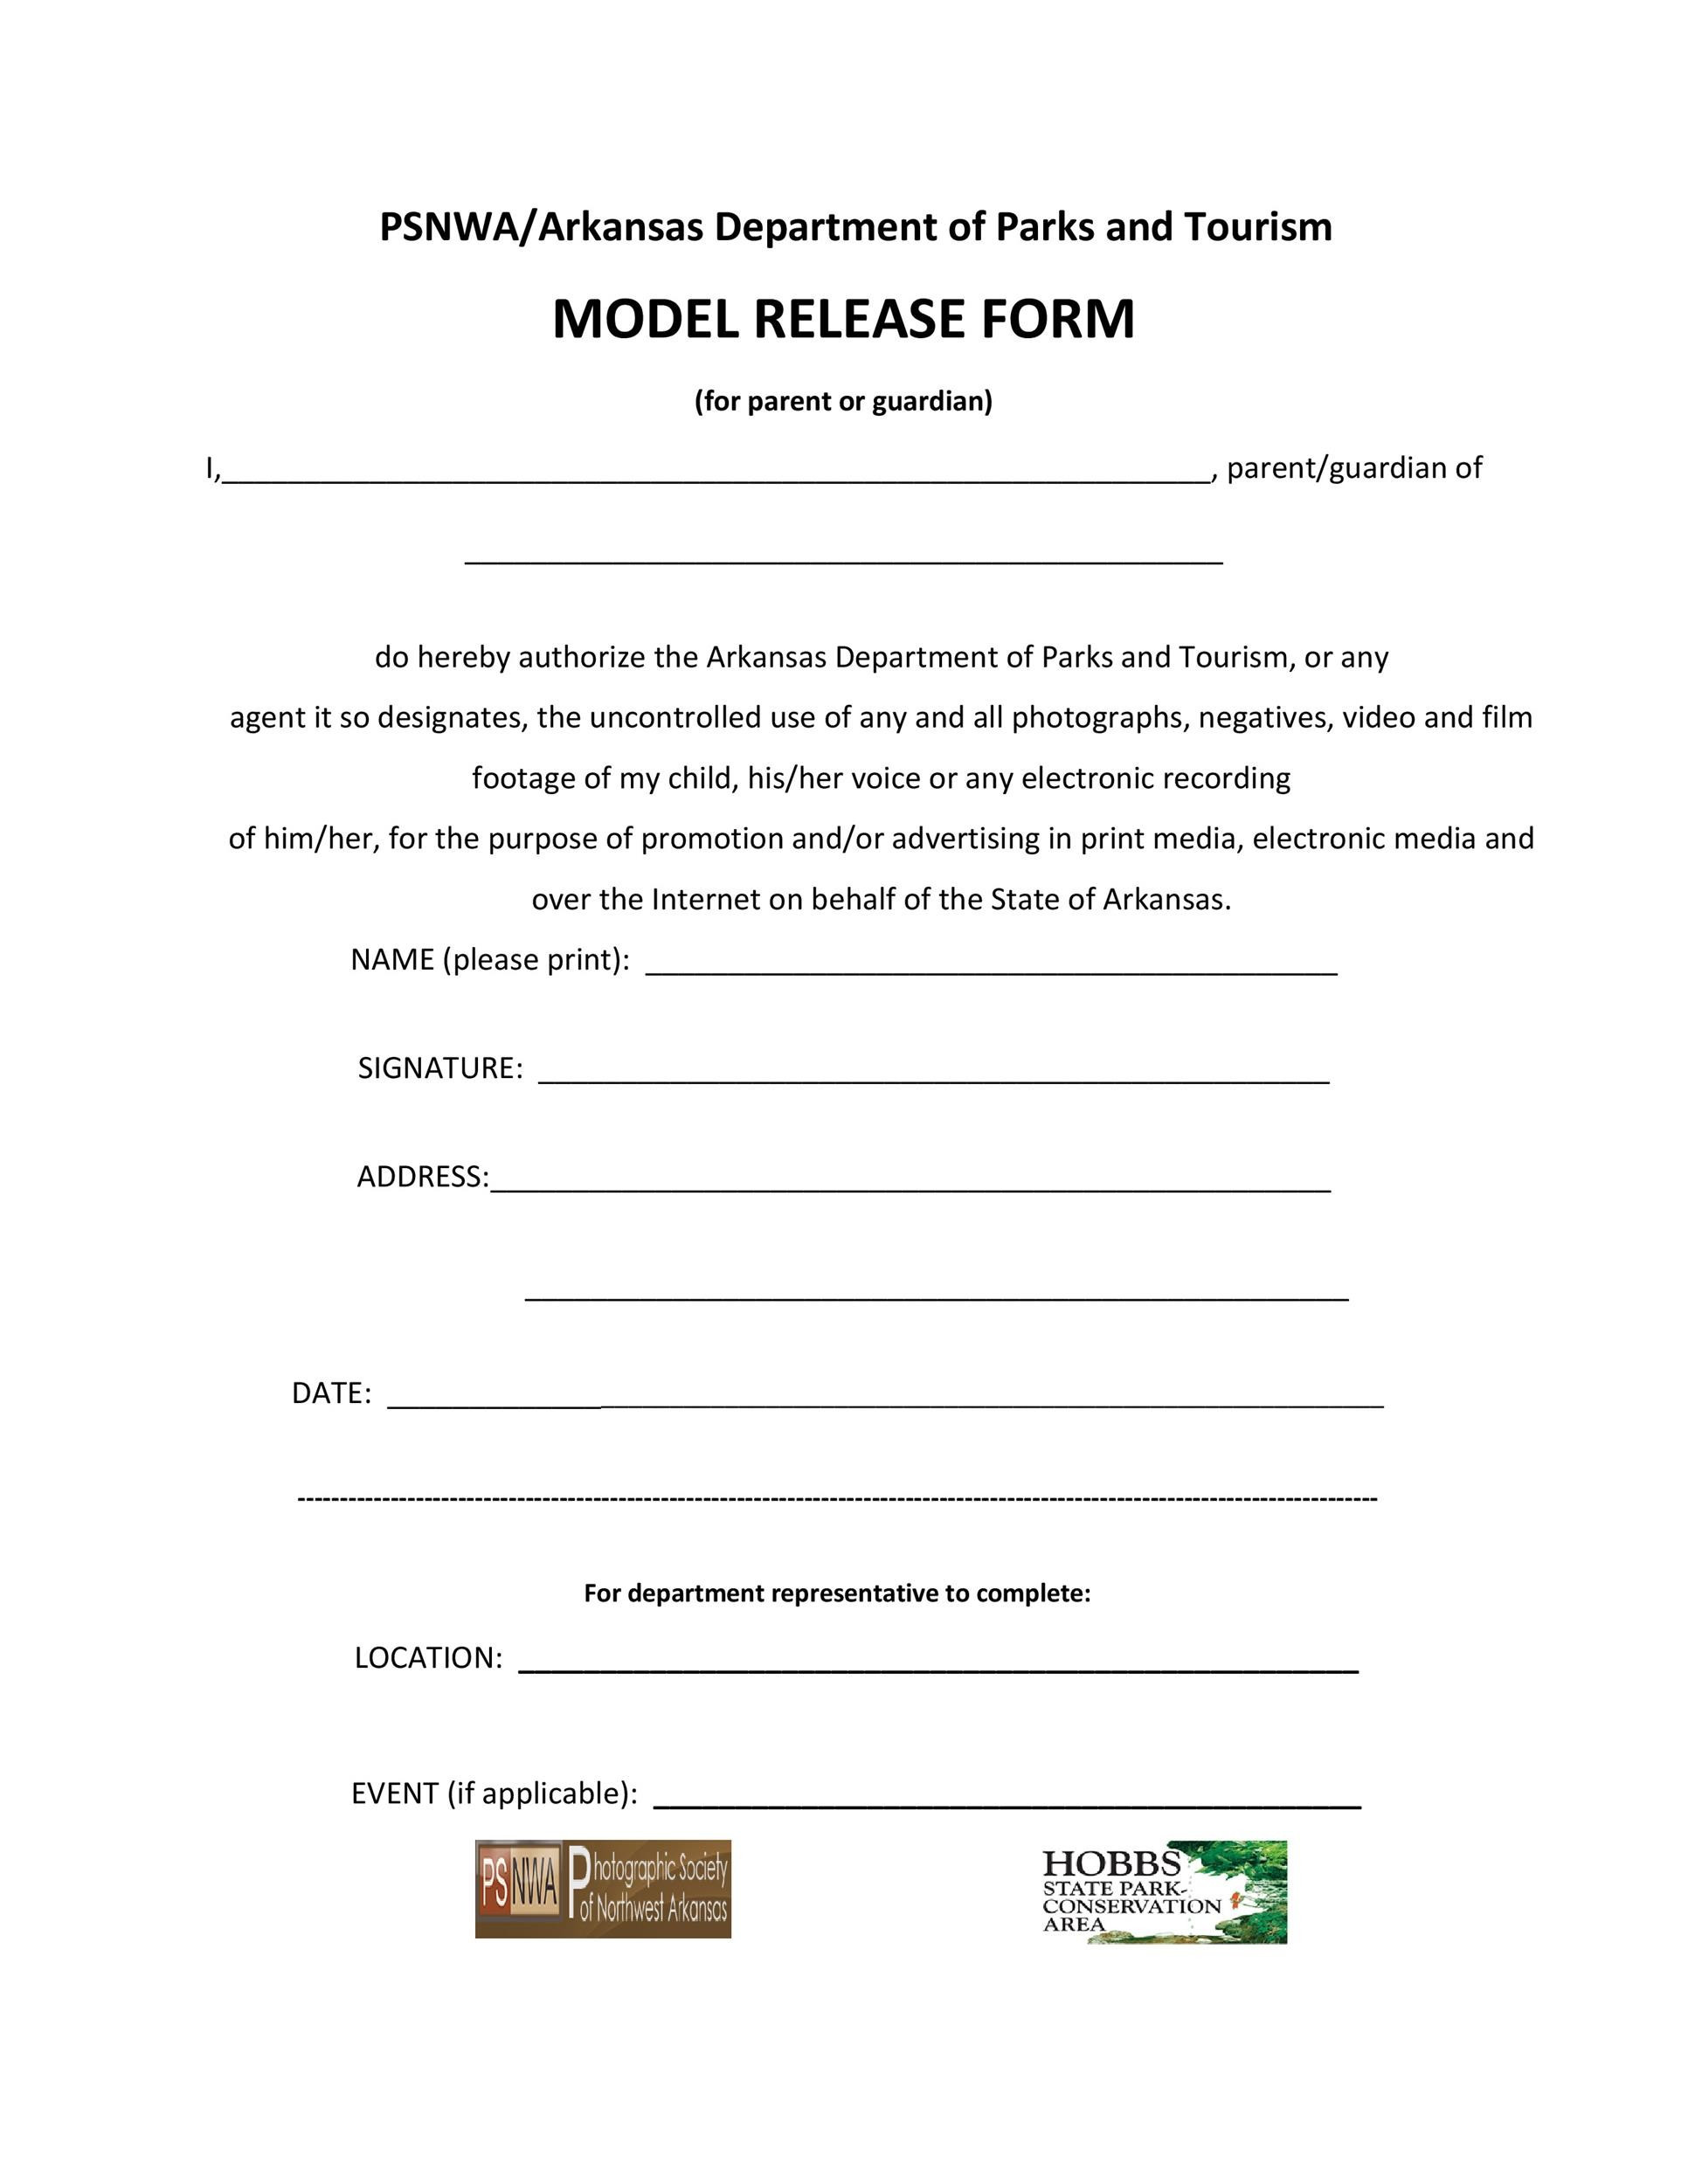 Model Release form Template 50 Best Model Release forms Free Templates Templatelab